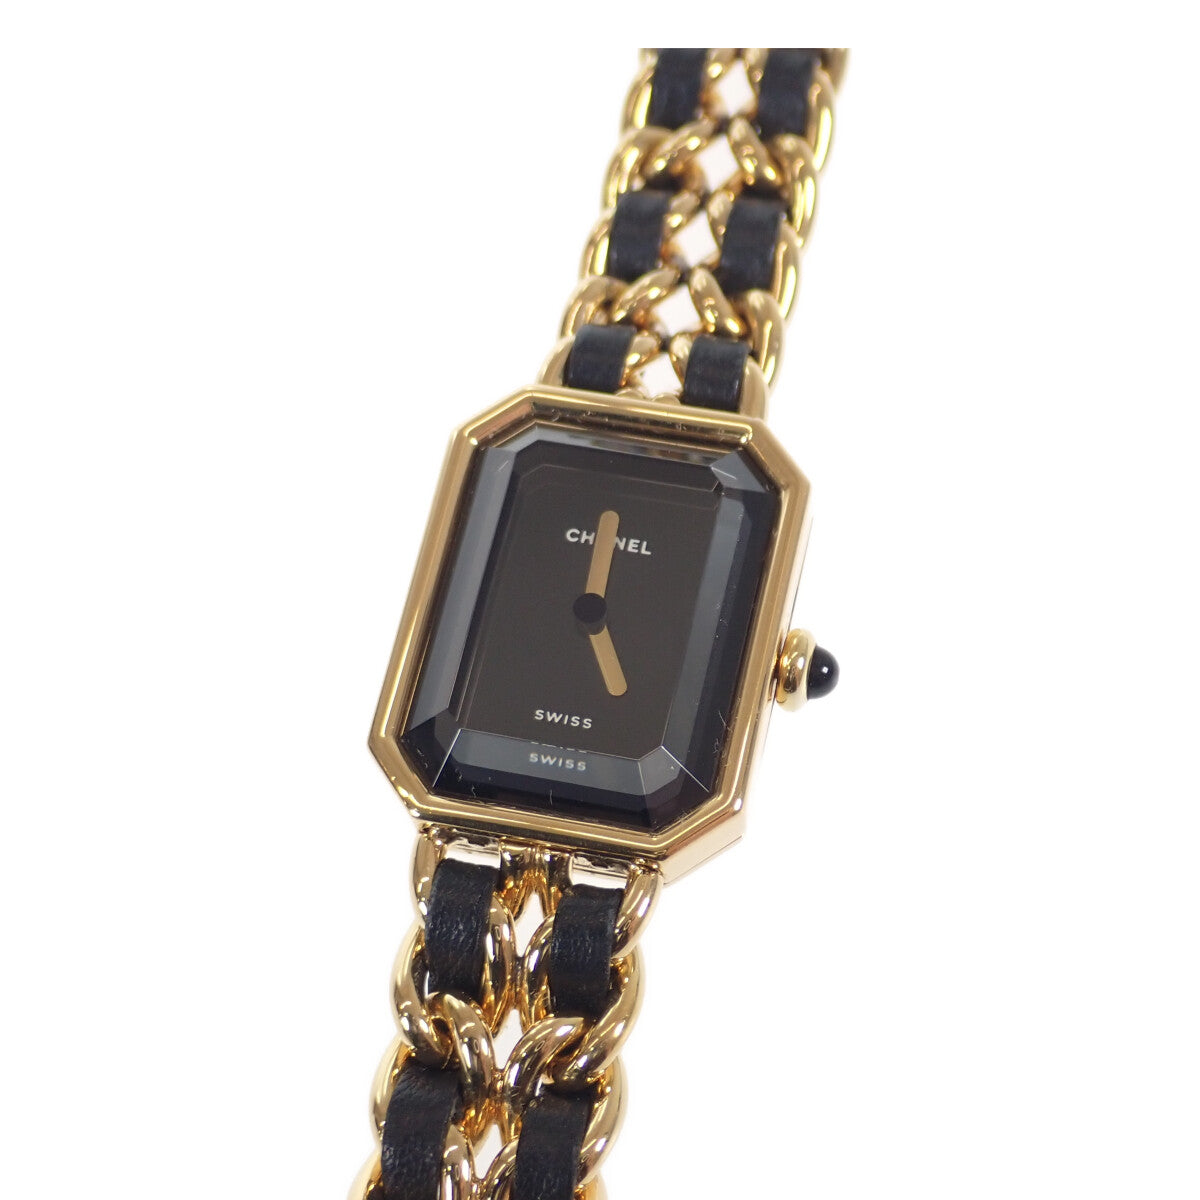 Chanel Women's Premiere Watch H0001 in Black and Gold, Leather Strap, Black Quartz Dial, Size L (Pre-owned) H0001